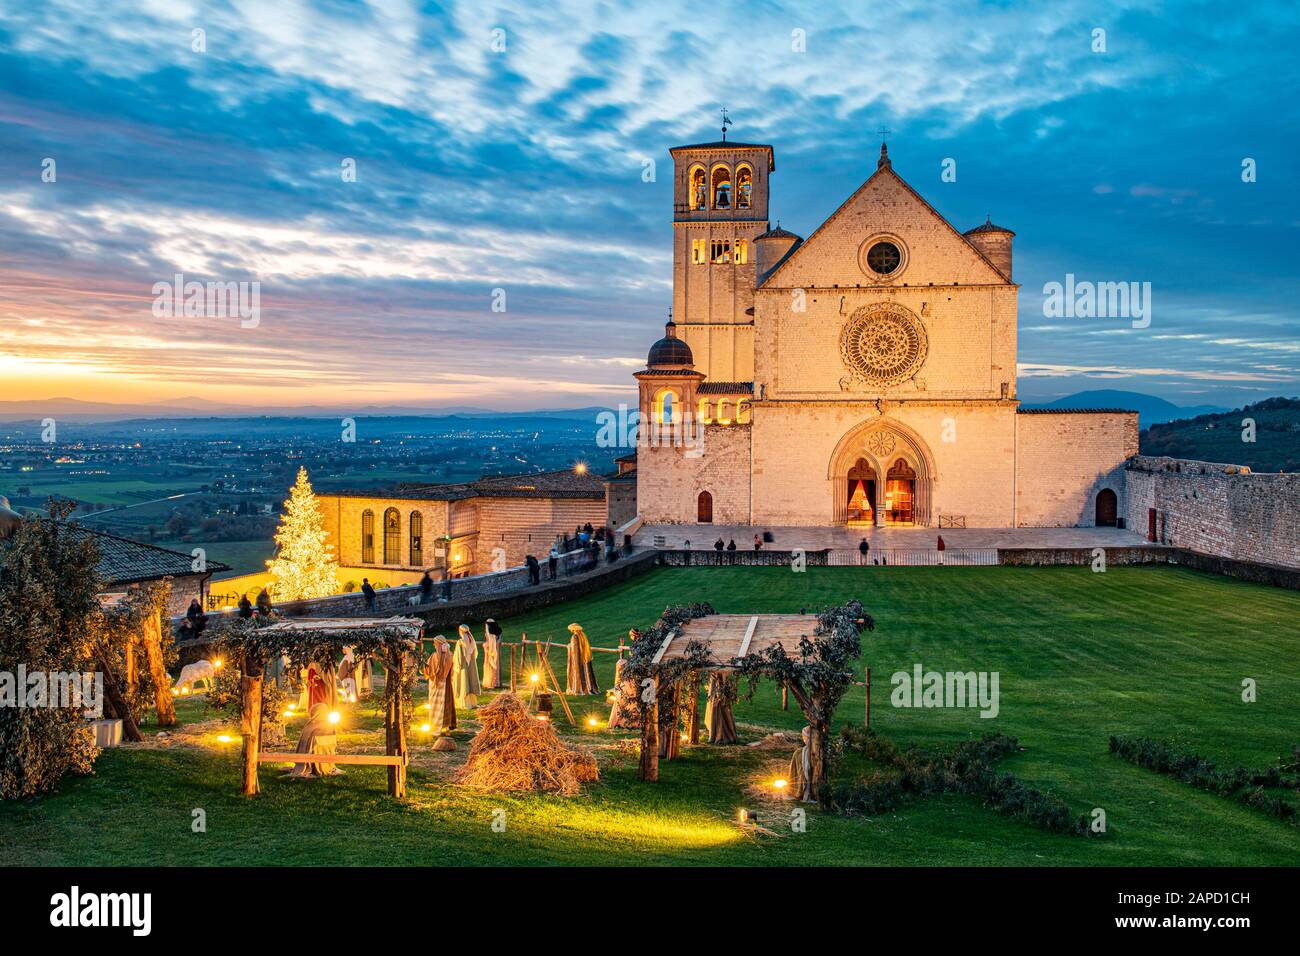 Assisi, Perugia, Umbria, Italy. The majestic church of San Francesco, where the saint is buried, at sunset, with the crib outside during Christmas Stock Photo